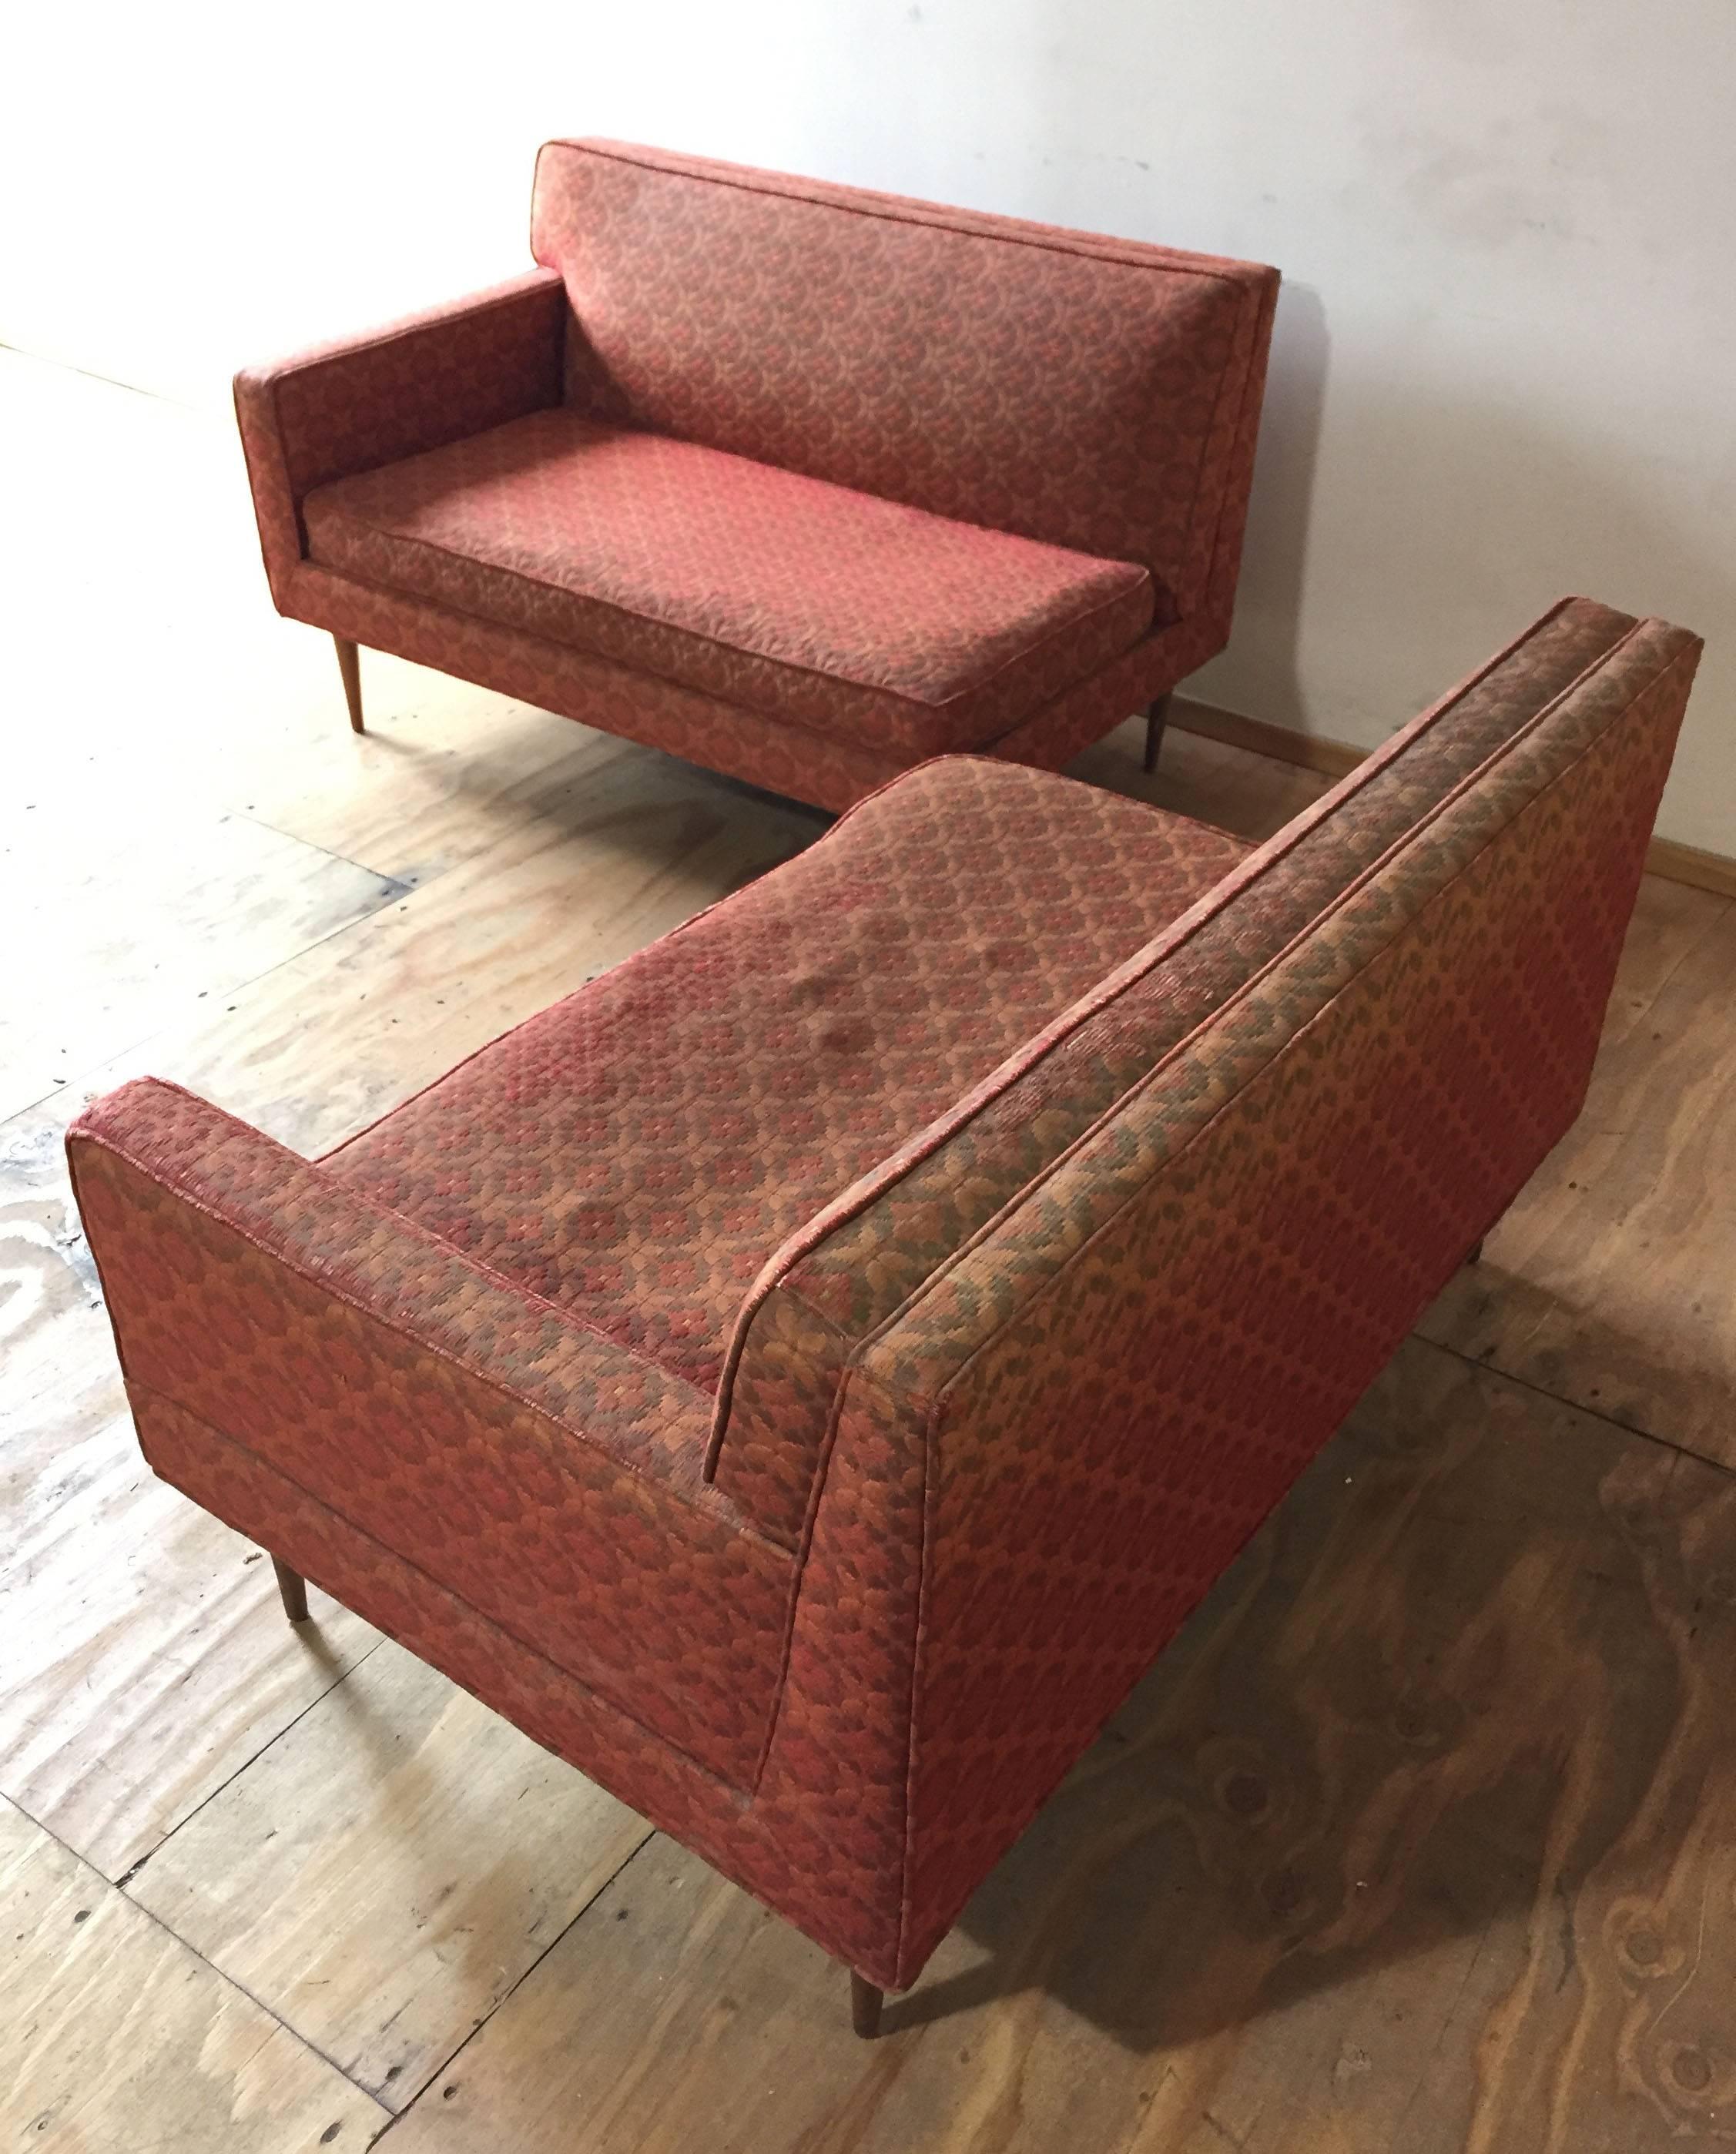 Clean modern vintage sofa with elegant tapered legs attributed to Paul McCobb. Purchased from an estate containing other high end design (Paul McCobb, Knoll and Herman Miller thin edge). 

The fabric is really special on this one. Price is with